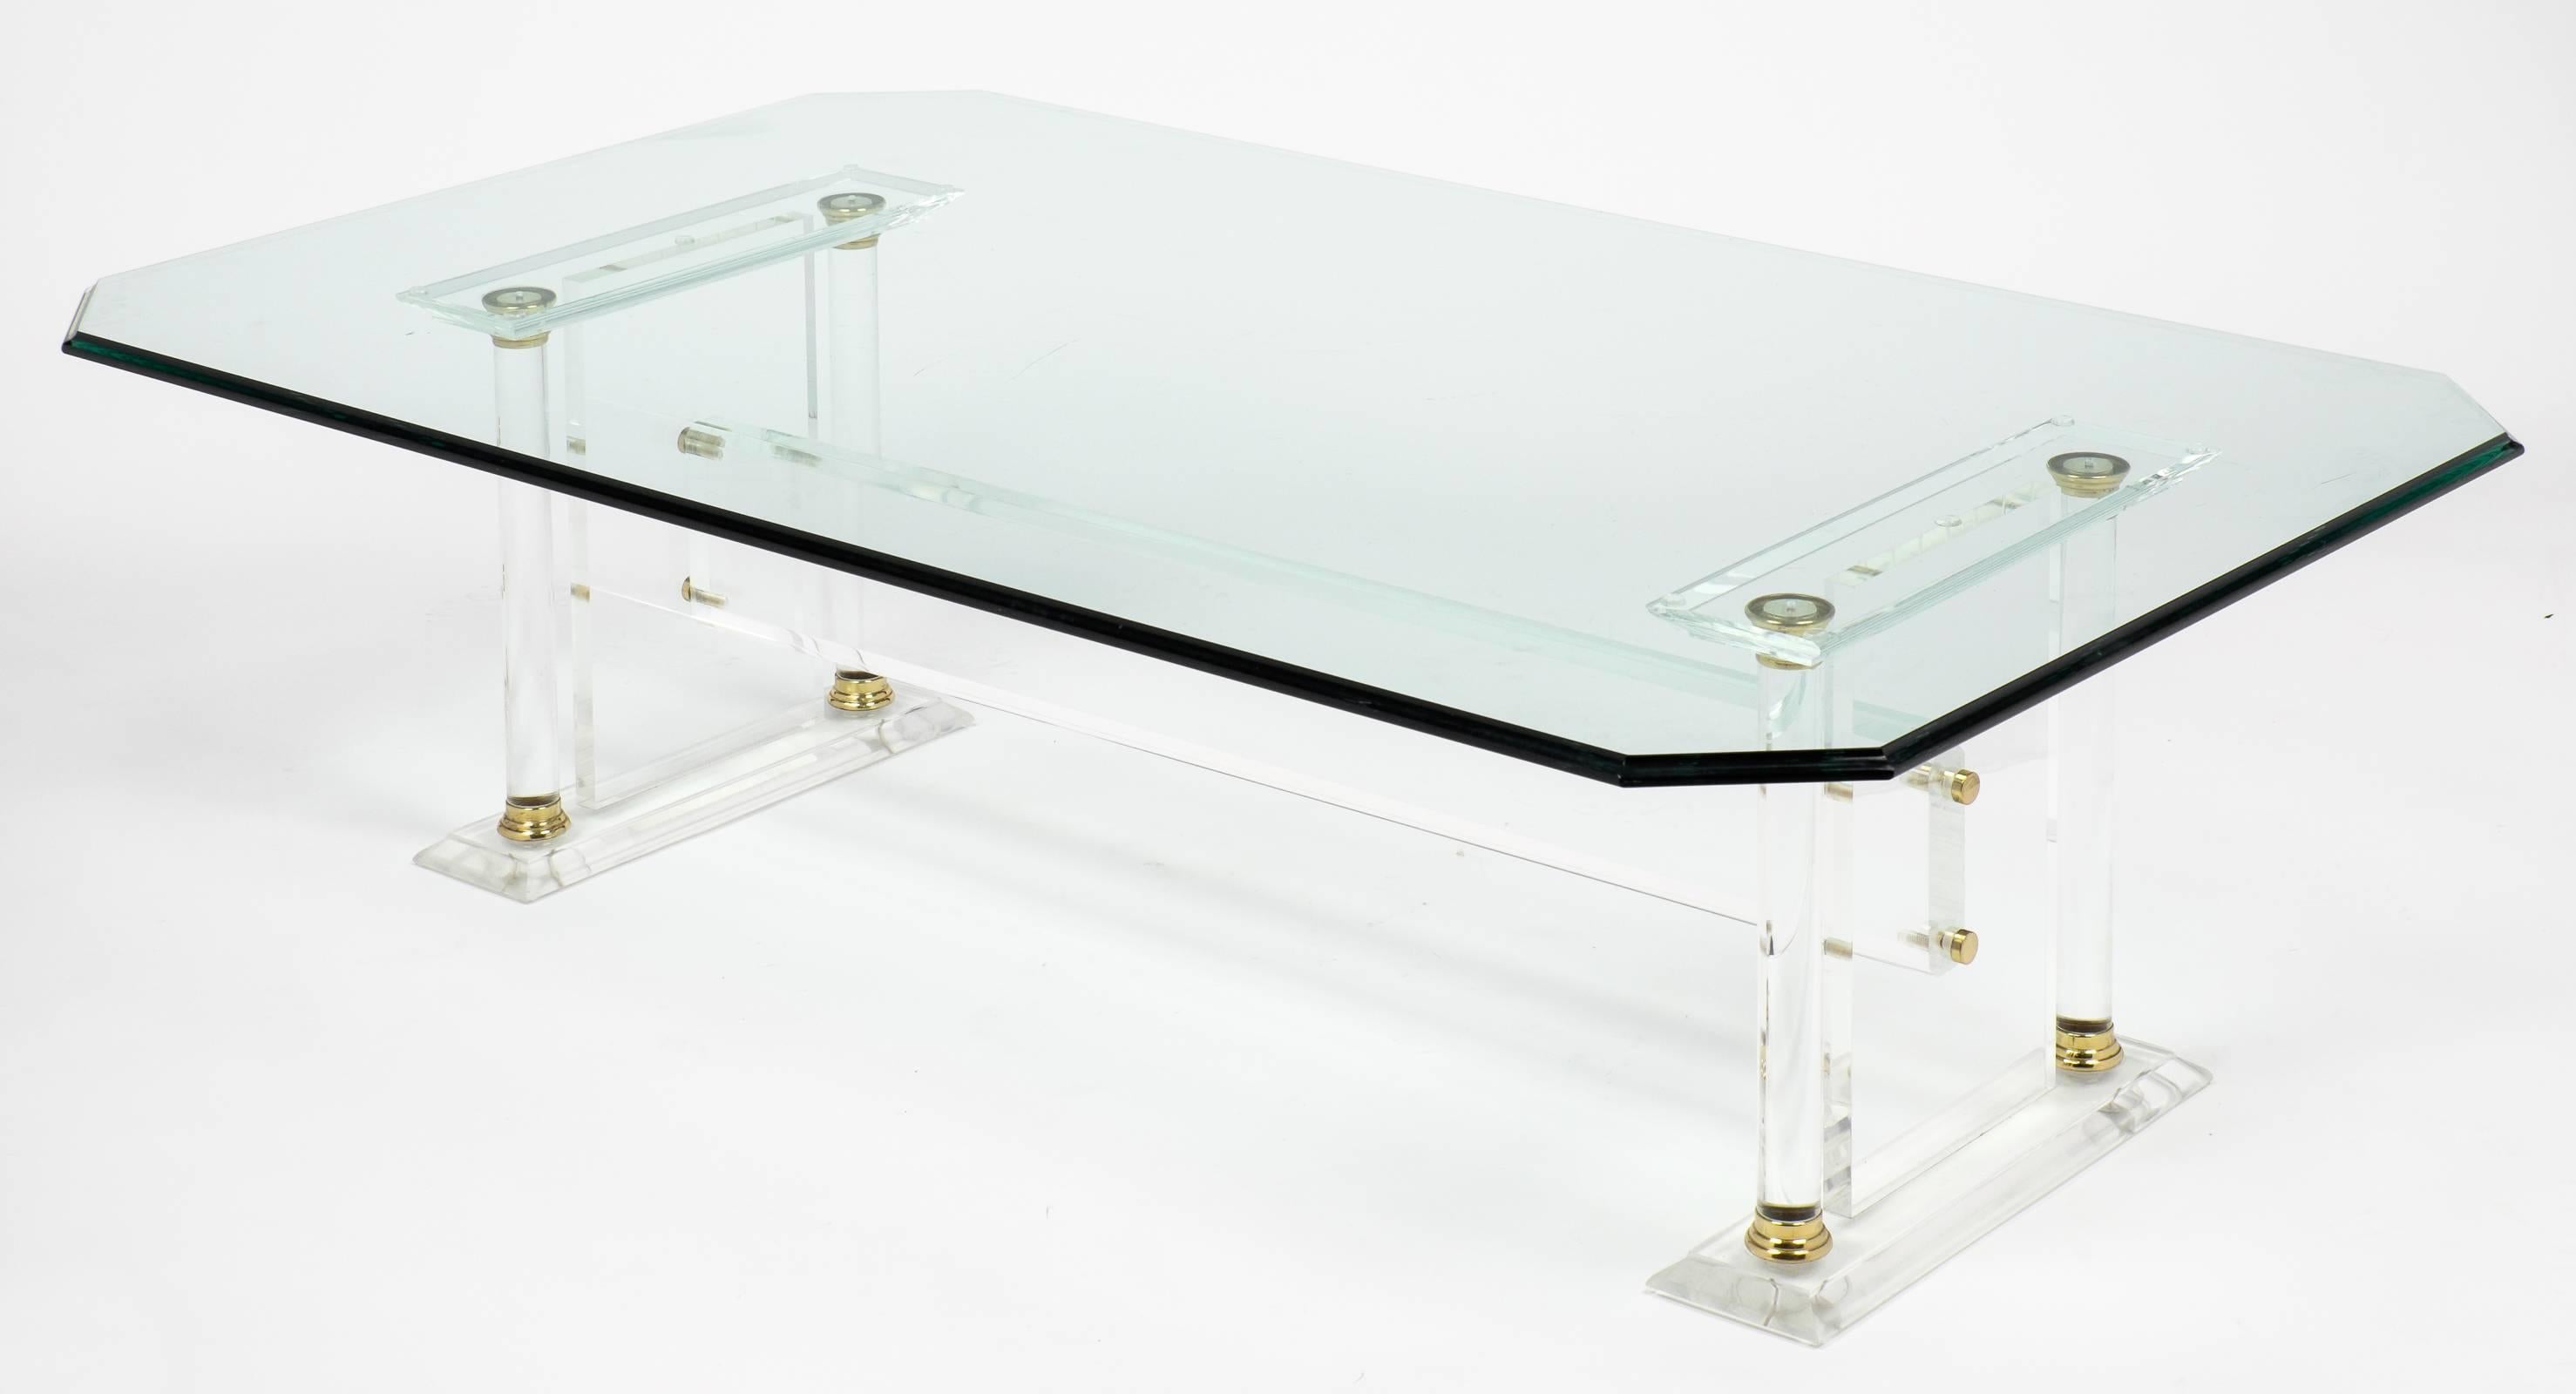 A sleek, crisp French Mid-Century Modern Glass Top Lucite Coffee Table with brass trim that creates the illusion of space with all of the amenities. This spectacular translucent piece with a classical appeal has a clipped corner glass slab tabletop